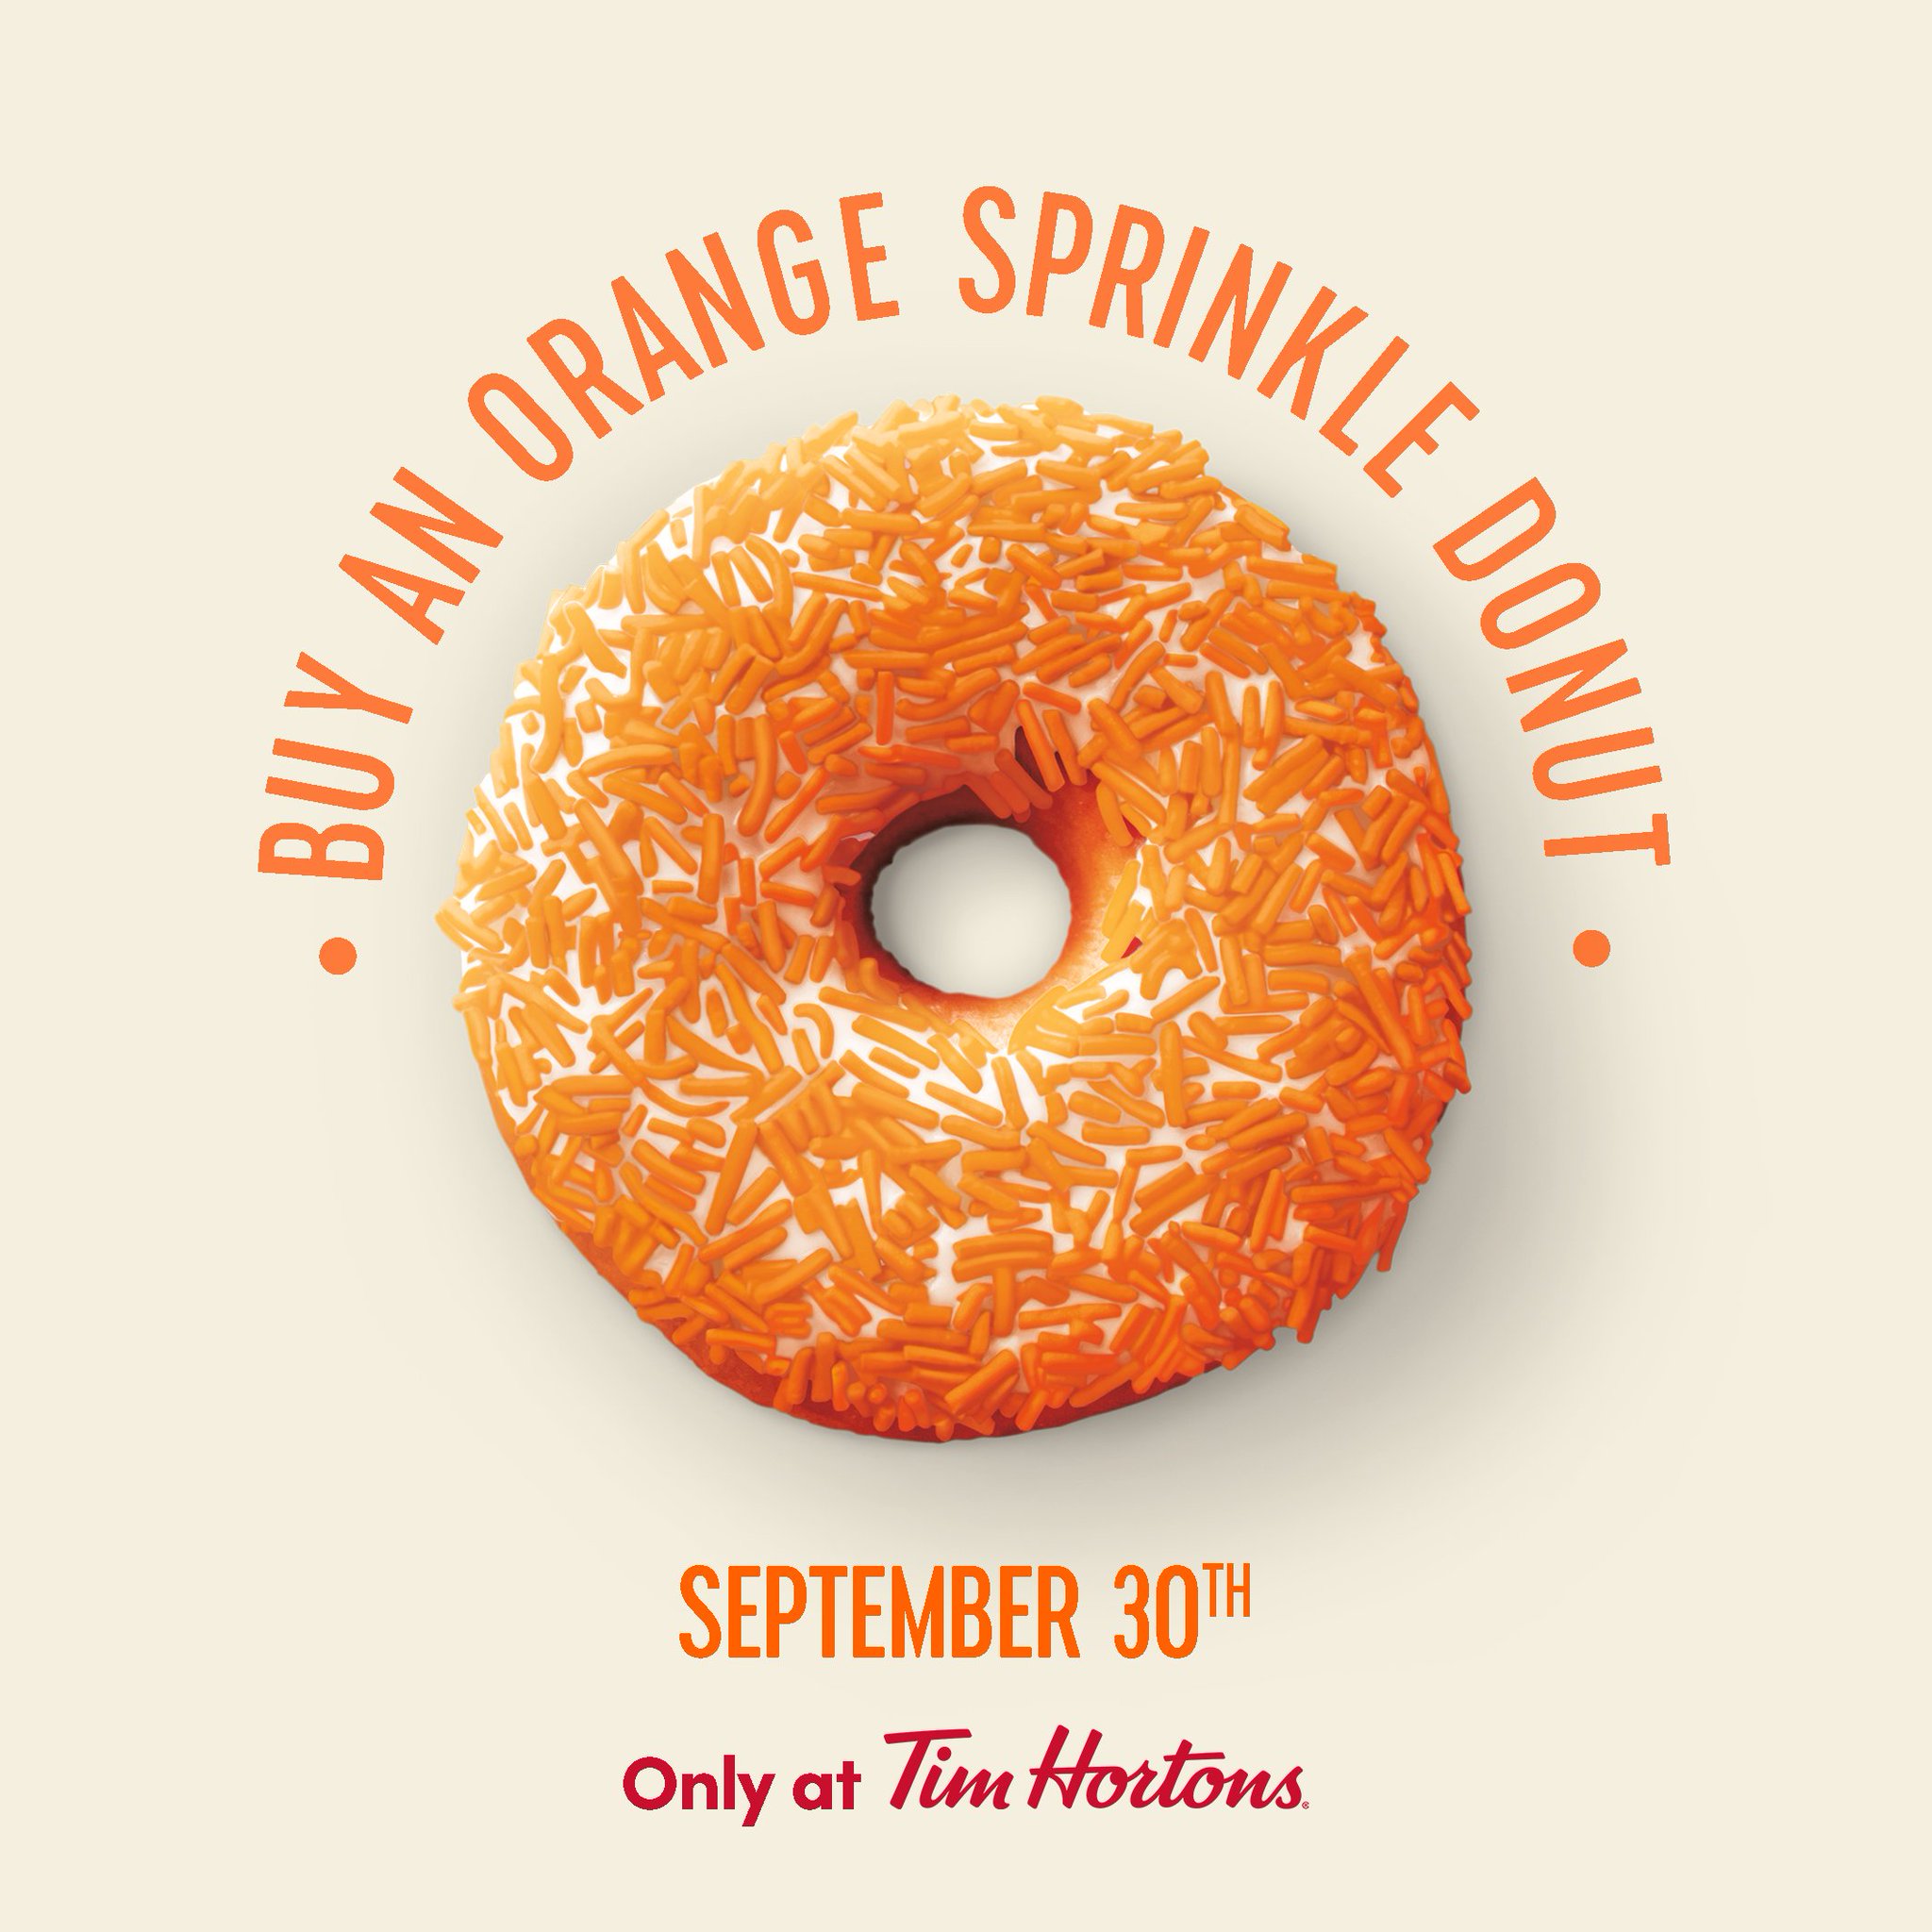 Tim Hortons Orange Sprinkle Donut campaign returns TODAY until Oct. 1 with  100% of proceeds donated to Indigenous organizations